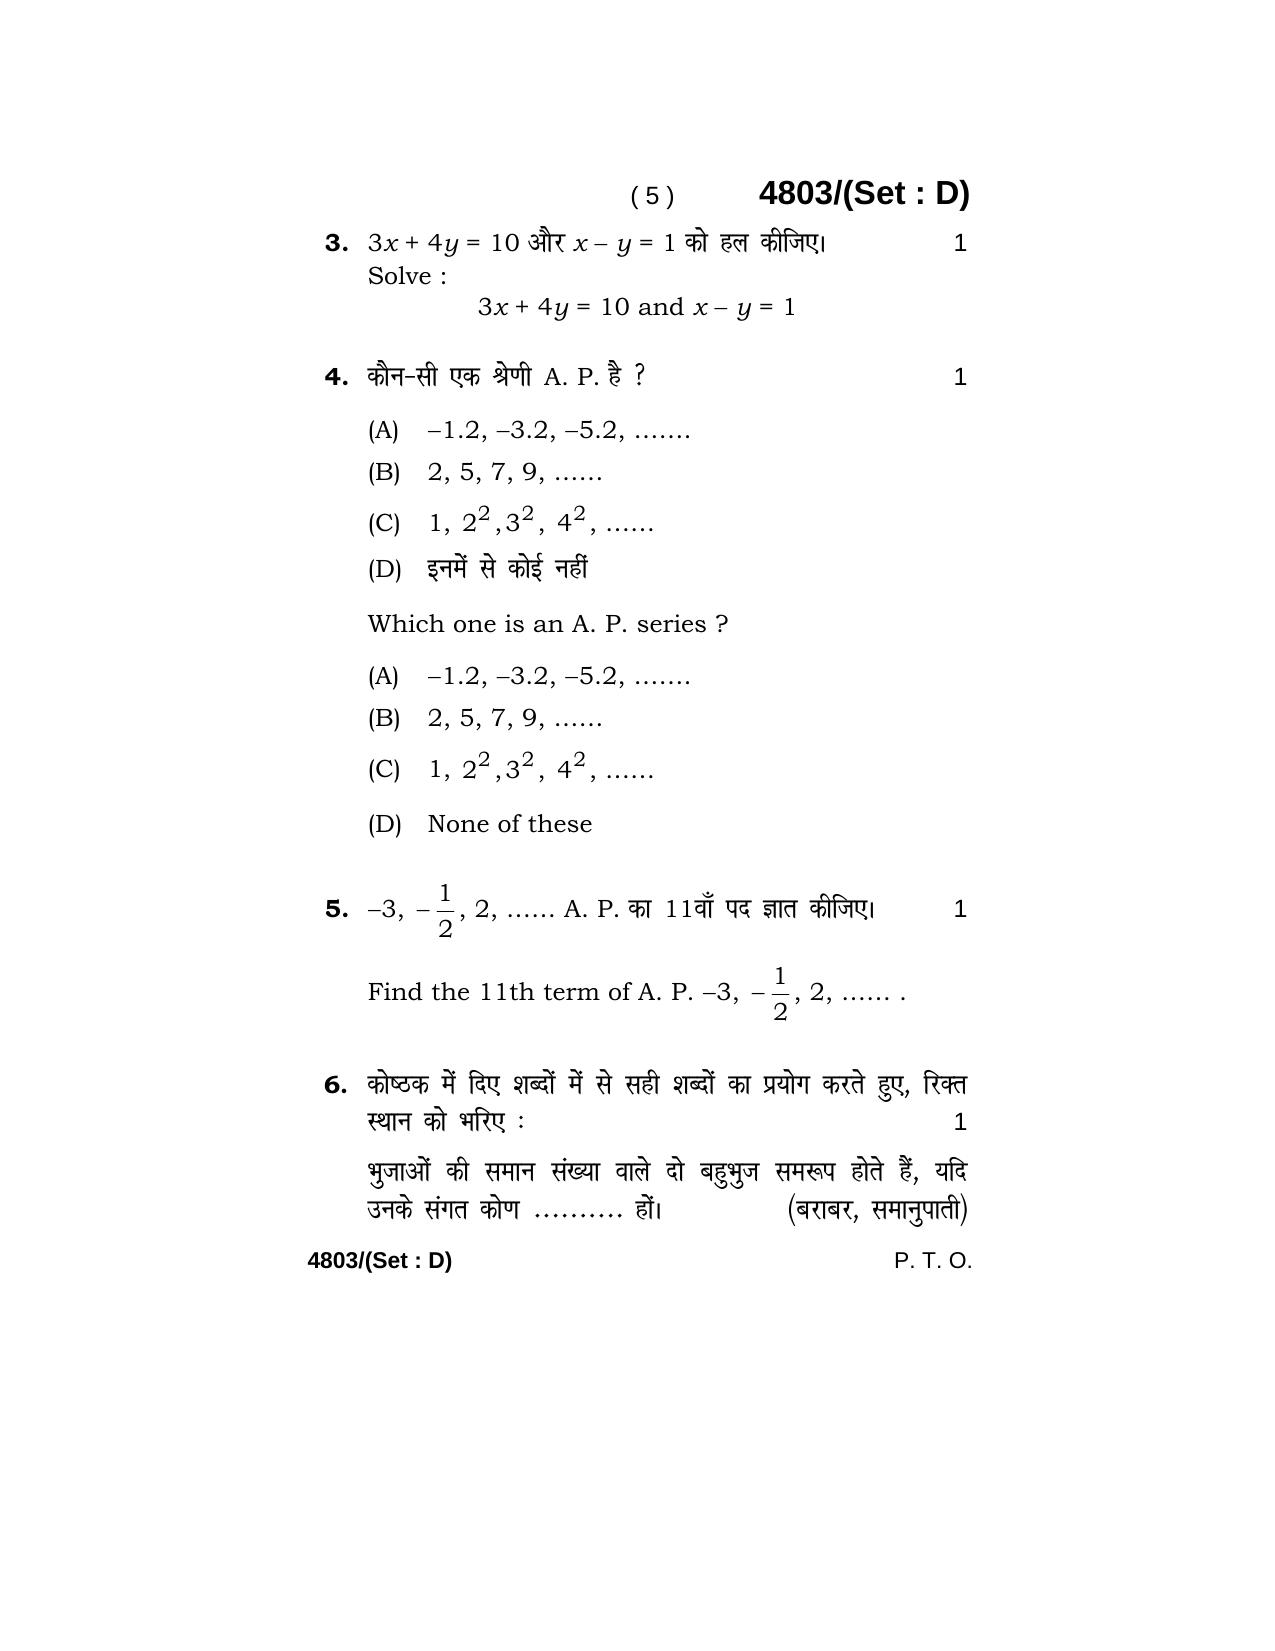 Haryana Board HBSE Class 10 Mathematics 2020 Question Paper - Page 53